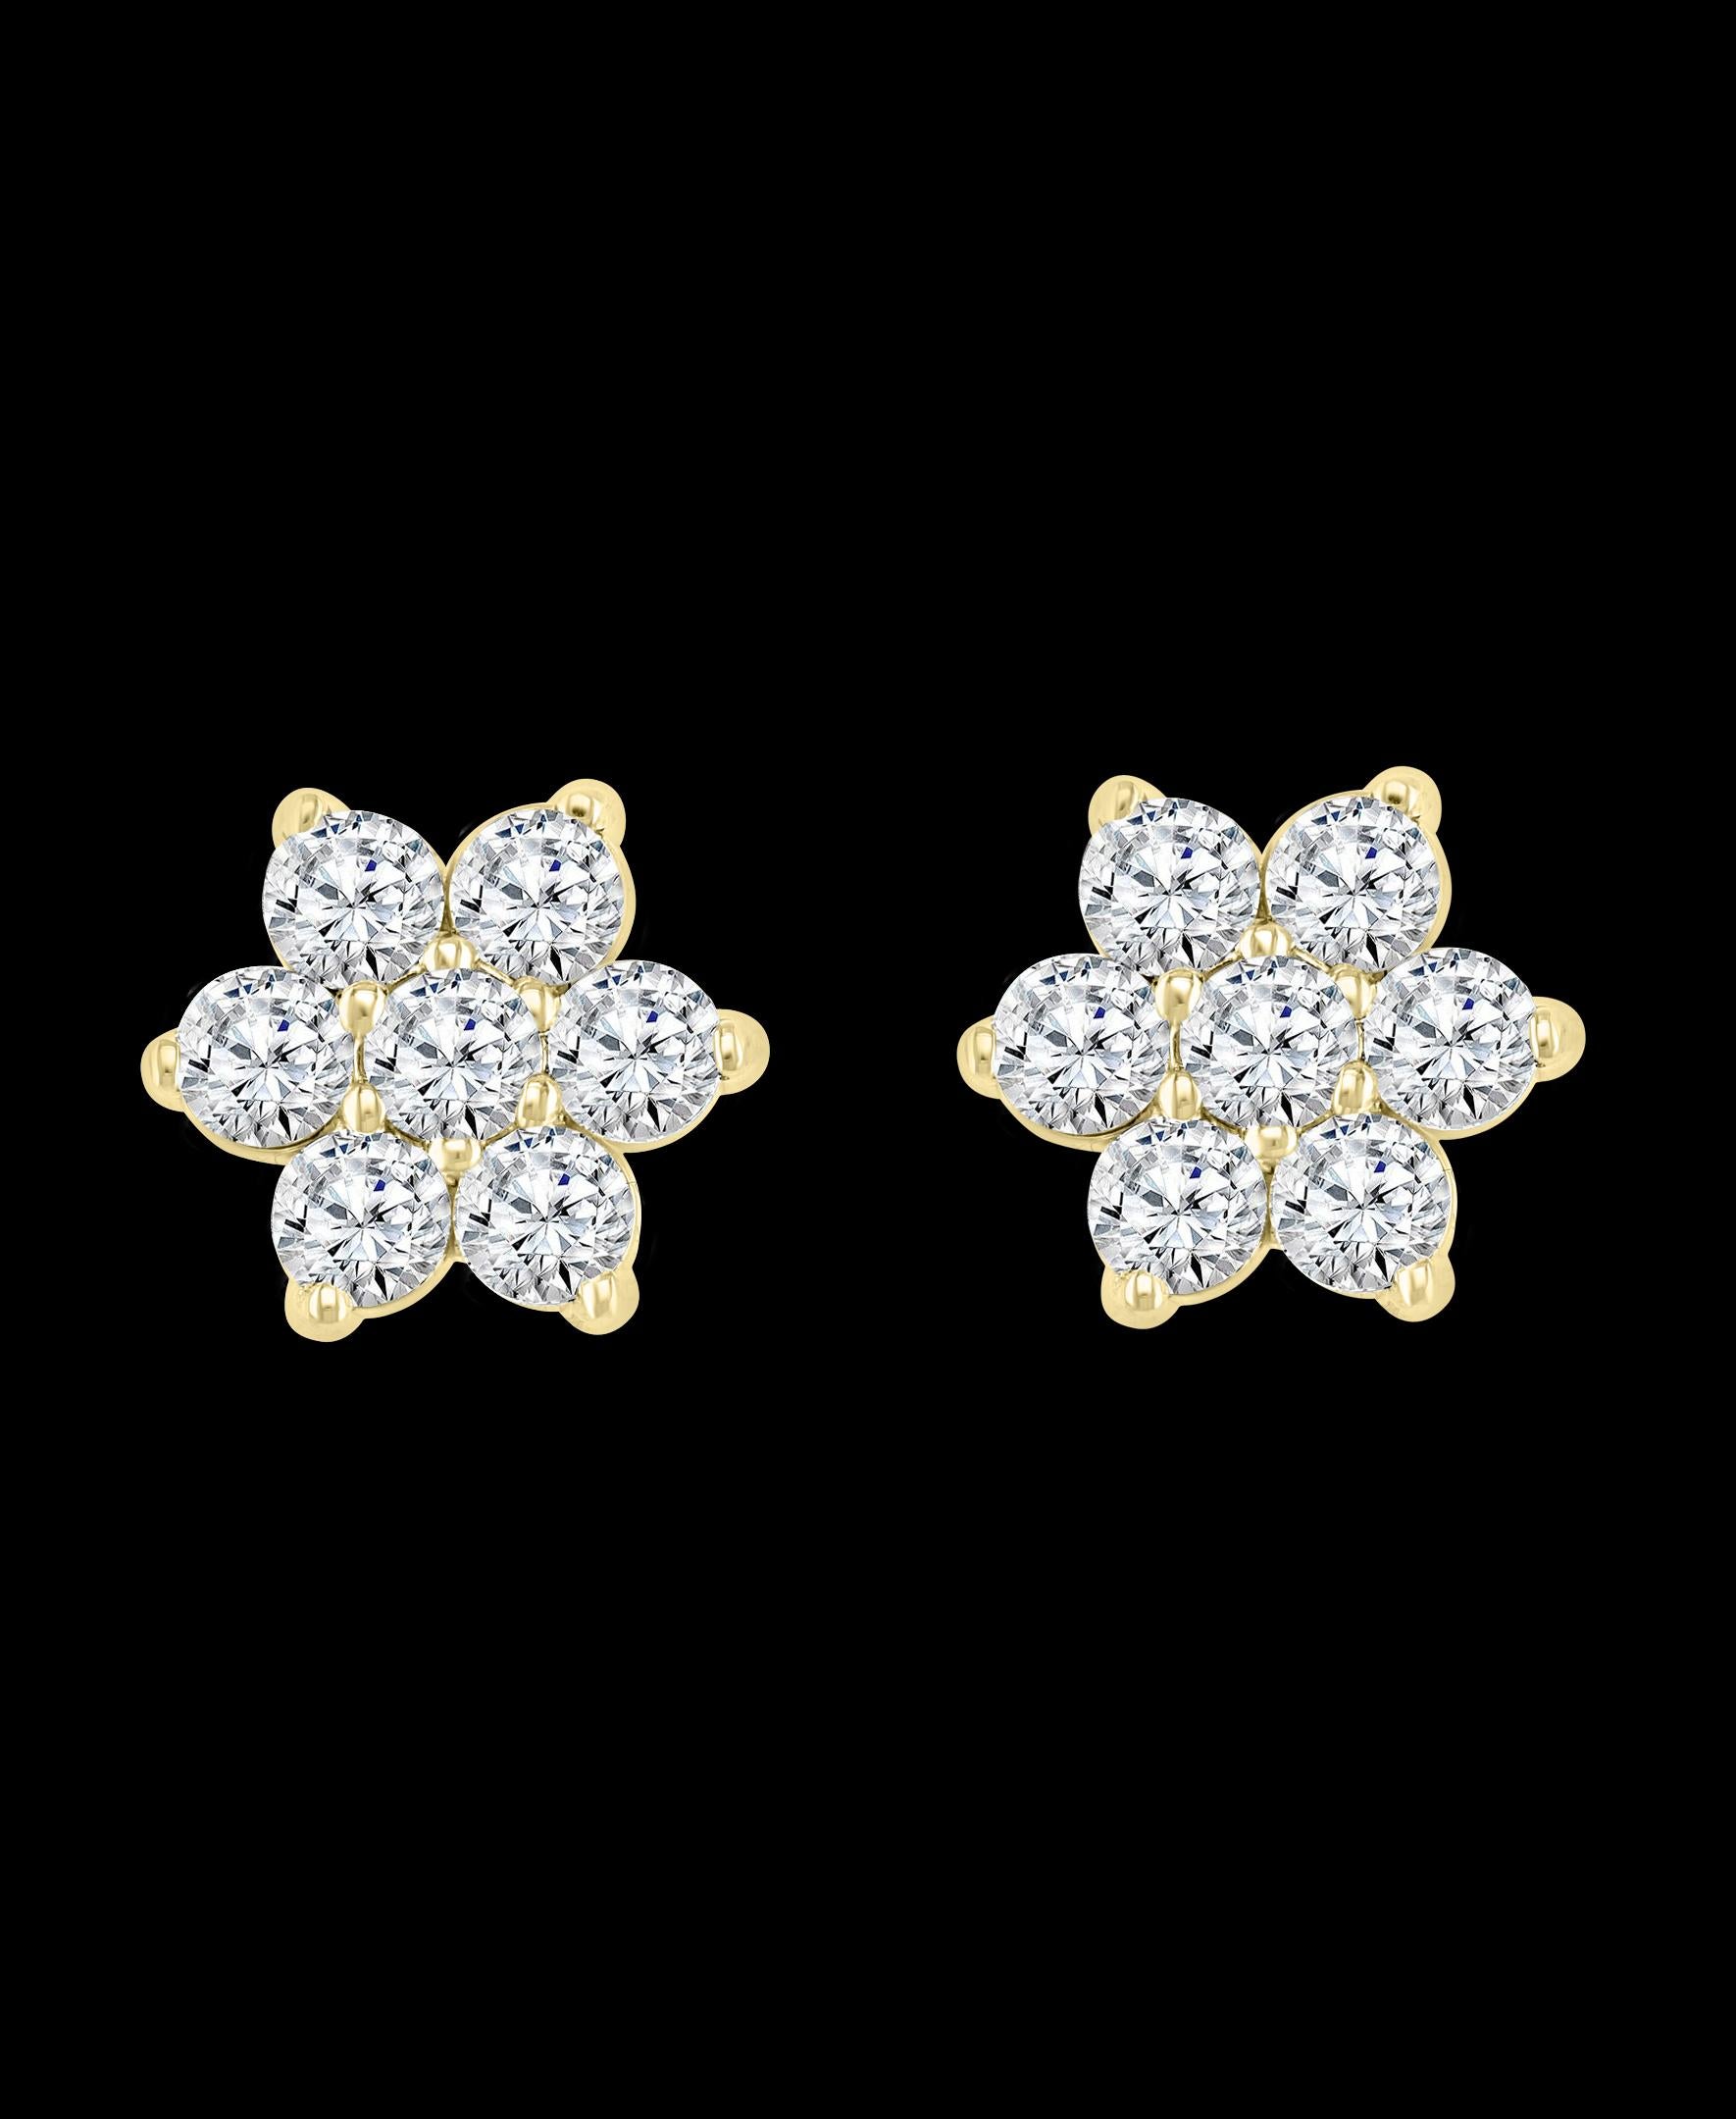 2.80 Carat 7 Diamond Floral Cluster Flower Stud Earrings in 14 Karat Yellow Gold
A sweet, shimmery style for any day of the week. These stud earrings blossom floral clusters of 2.80 ct. total Diamond Weight. round brilliant-cut diamonds. Set in 14kt